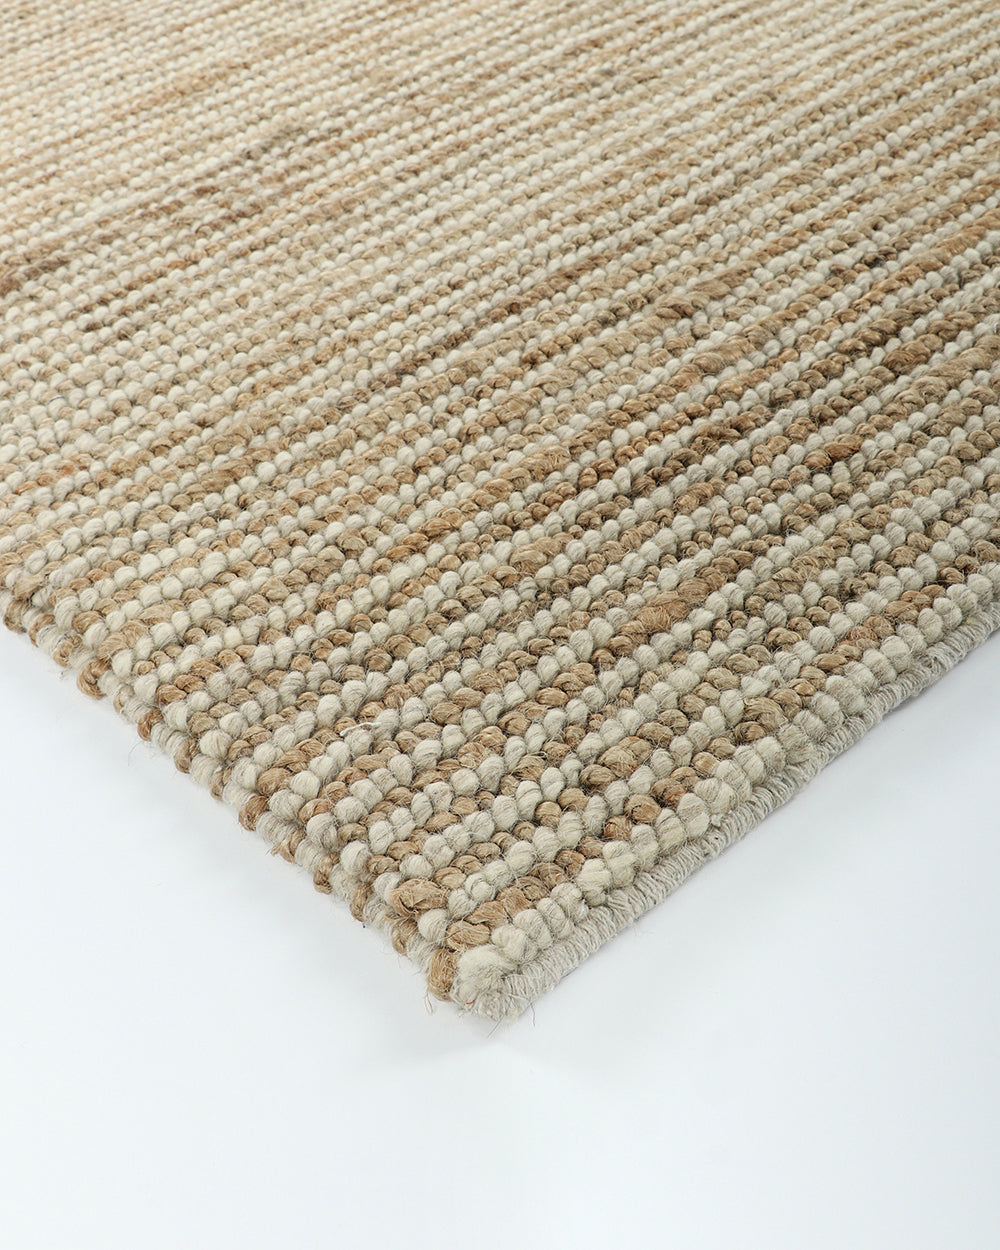 Lima Sand Natural Rug from Baya Furtex Stockist Make Your House A Home, Furniture Store Bendigo. Free Australia Wide Delivery. Mulberi Rugs.